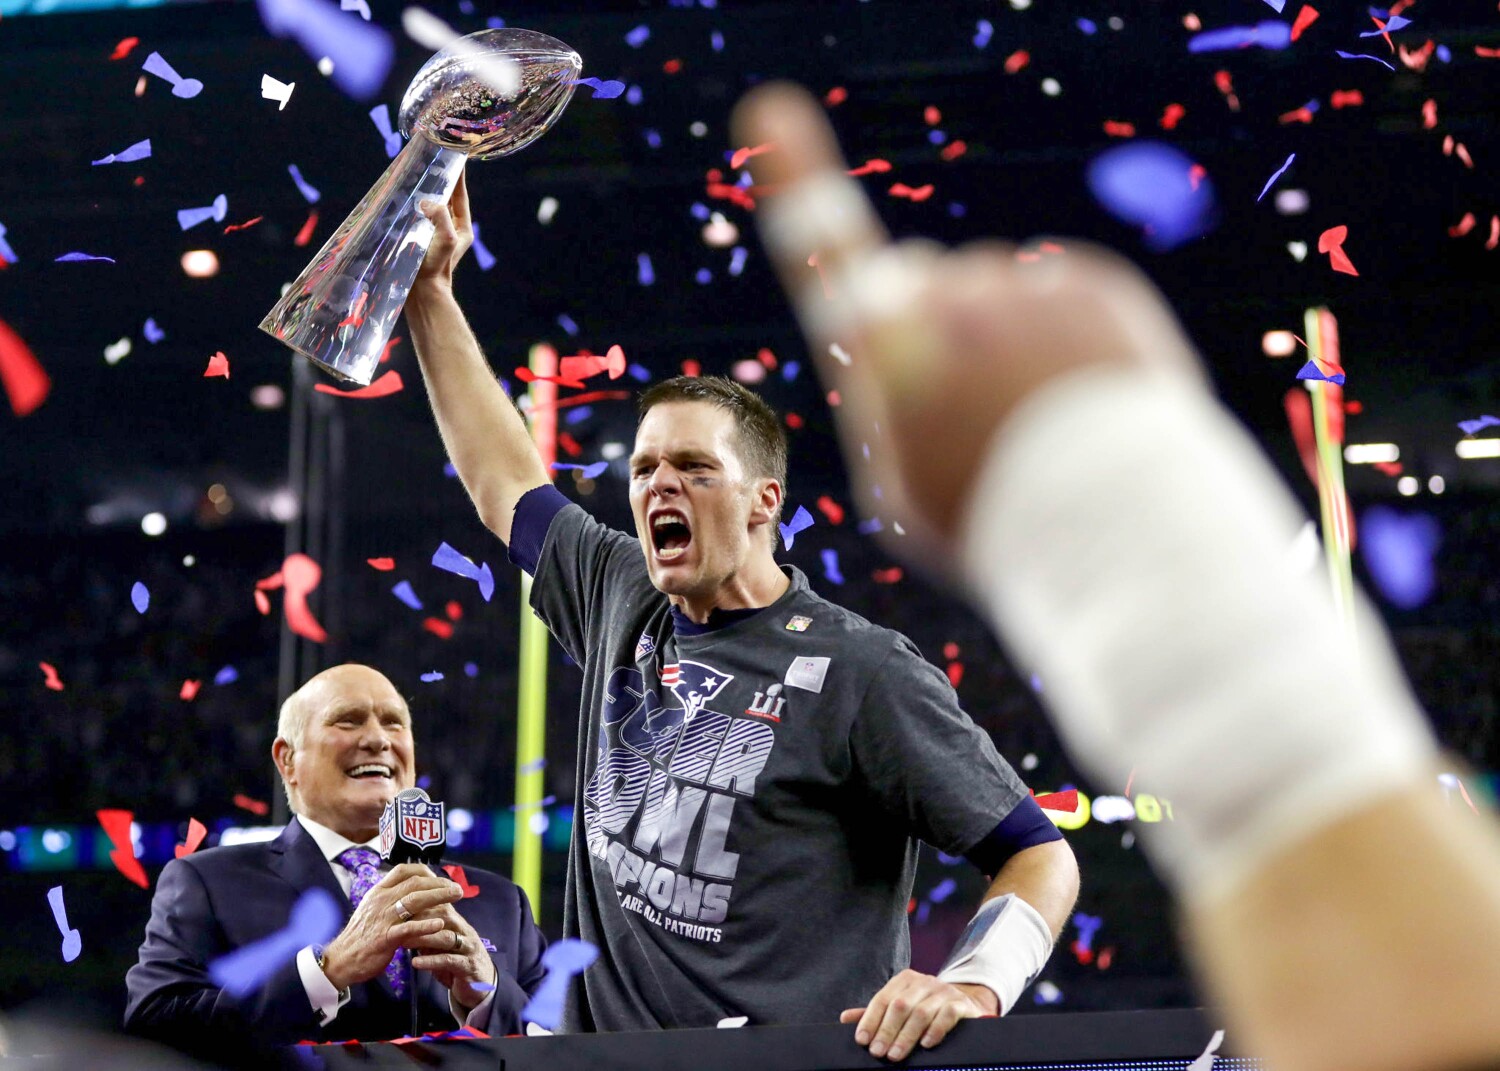 Man admits to posing as Tom Brady's teammate to buy and sell Super Bowl rings